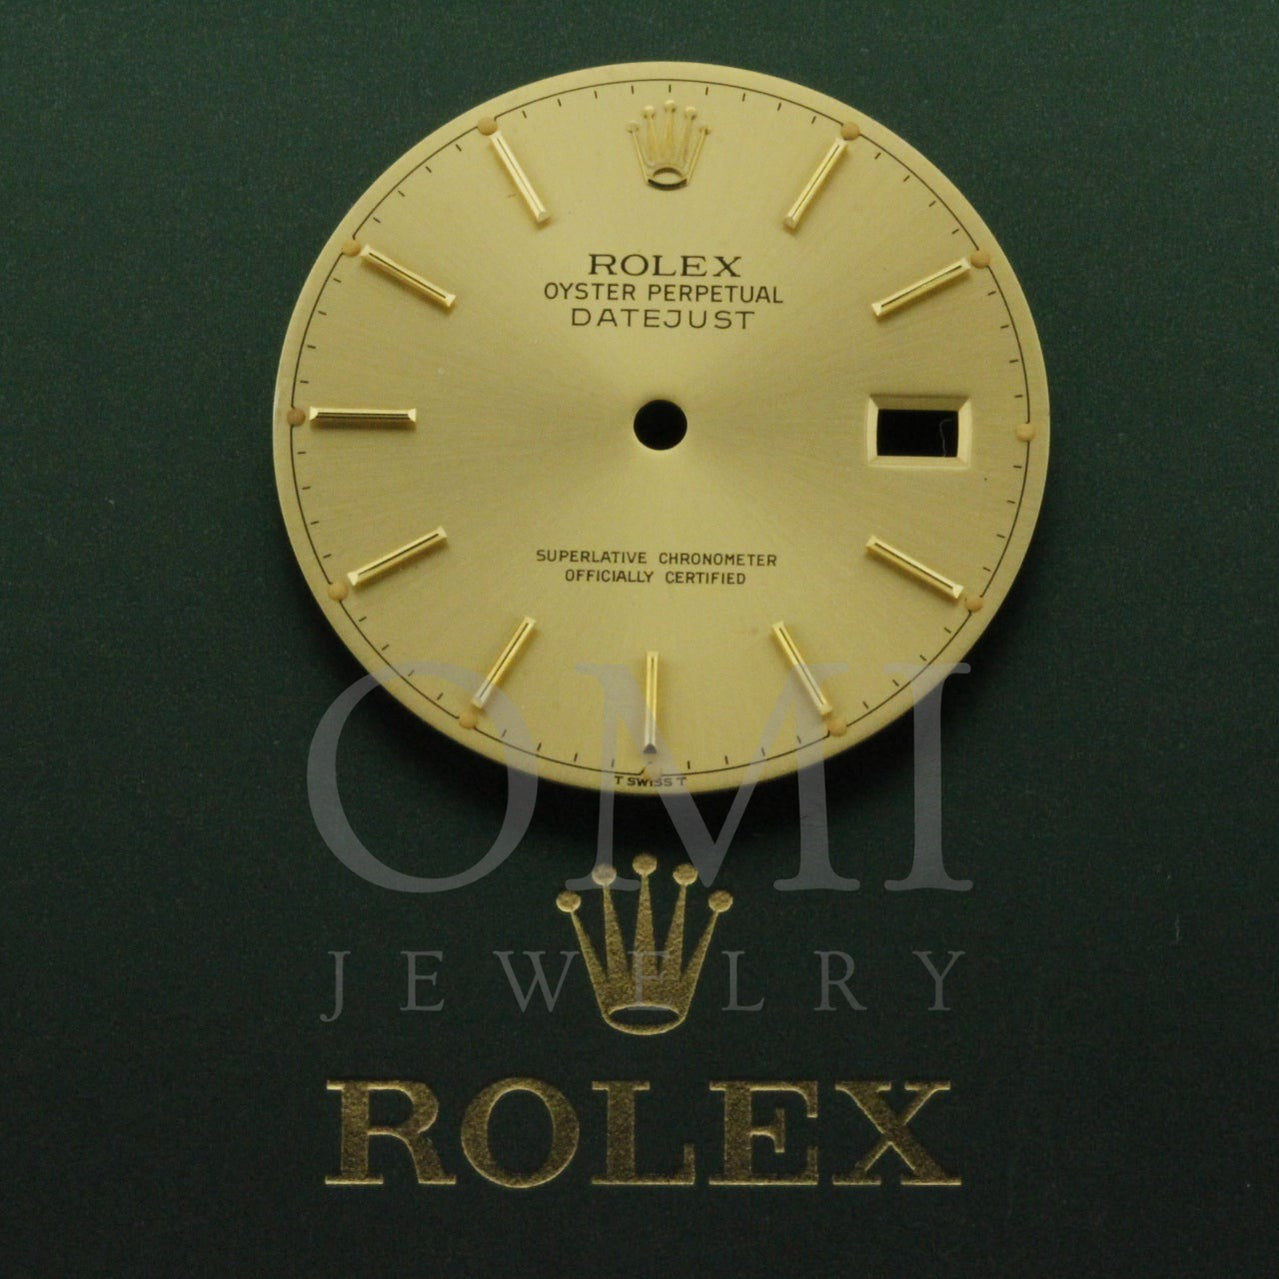 FACTORY ROLEX DATEJUST DIAL 36MM - Jewelry